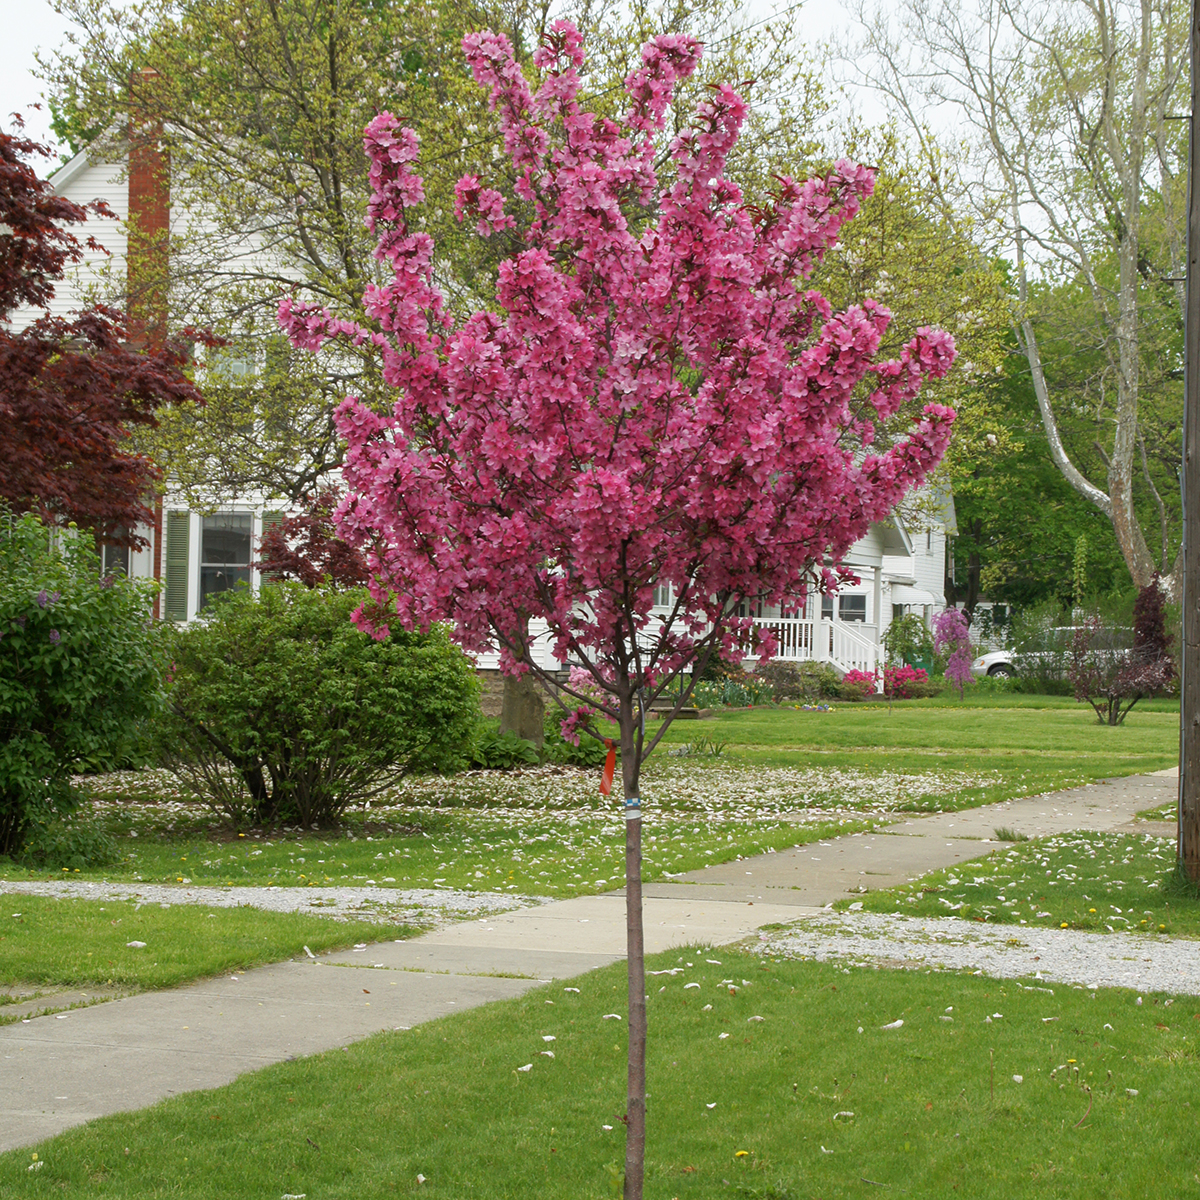 Show Time crabapple is a pink  blooming crabapple with a handsome rounded canopy